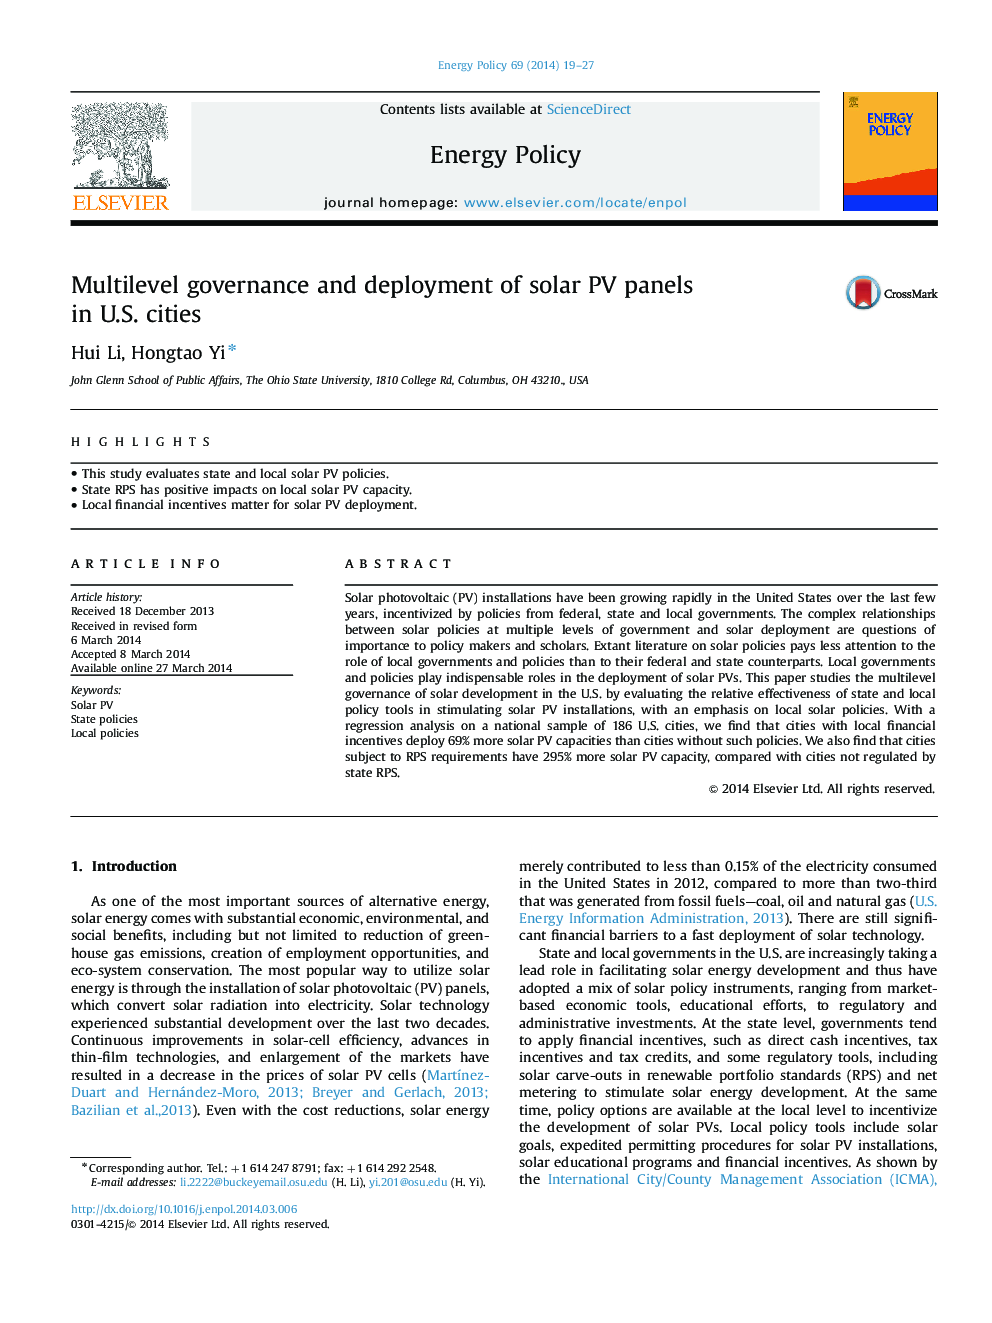 Multilevel governance and deployment of solar PV panels in U.S. cities